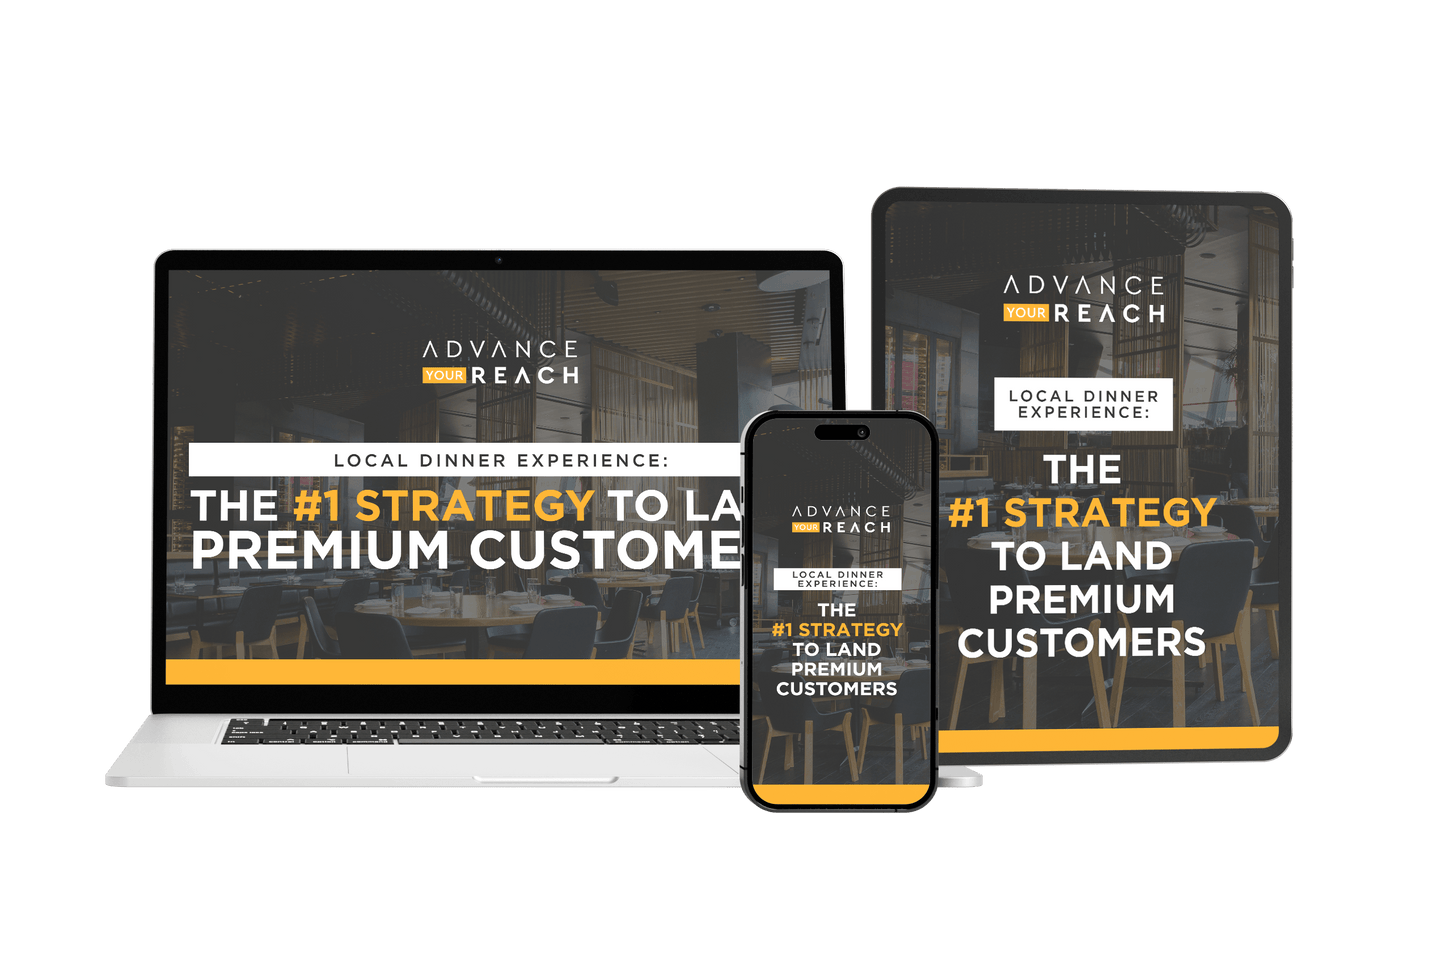 Local Dinner Experience: The #1 Strategy to Land Premium Customers